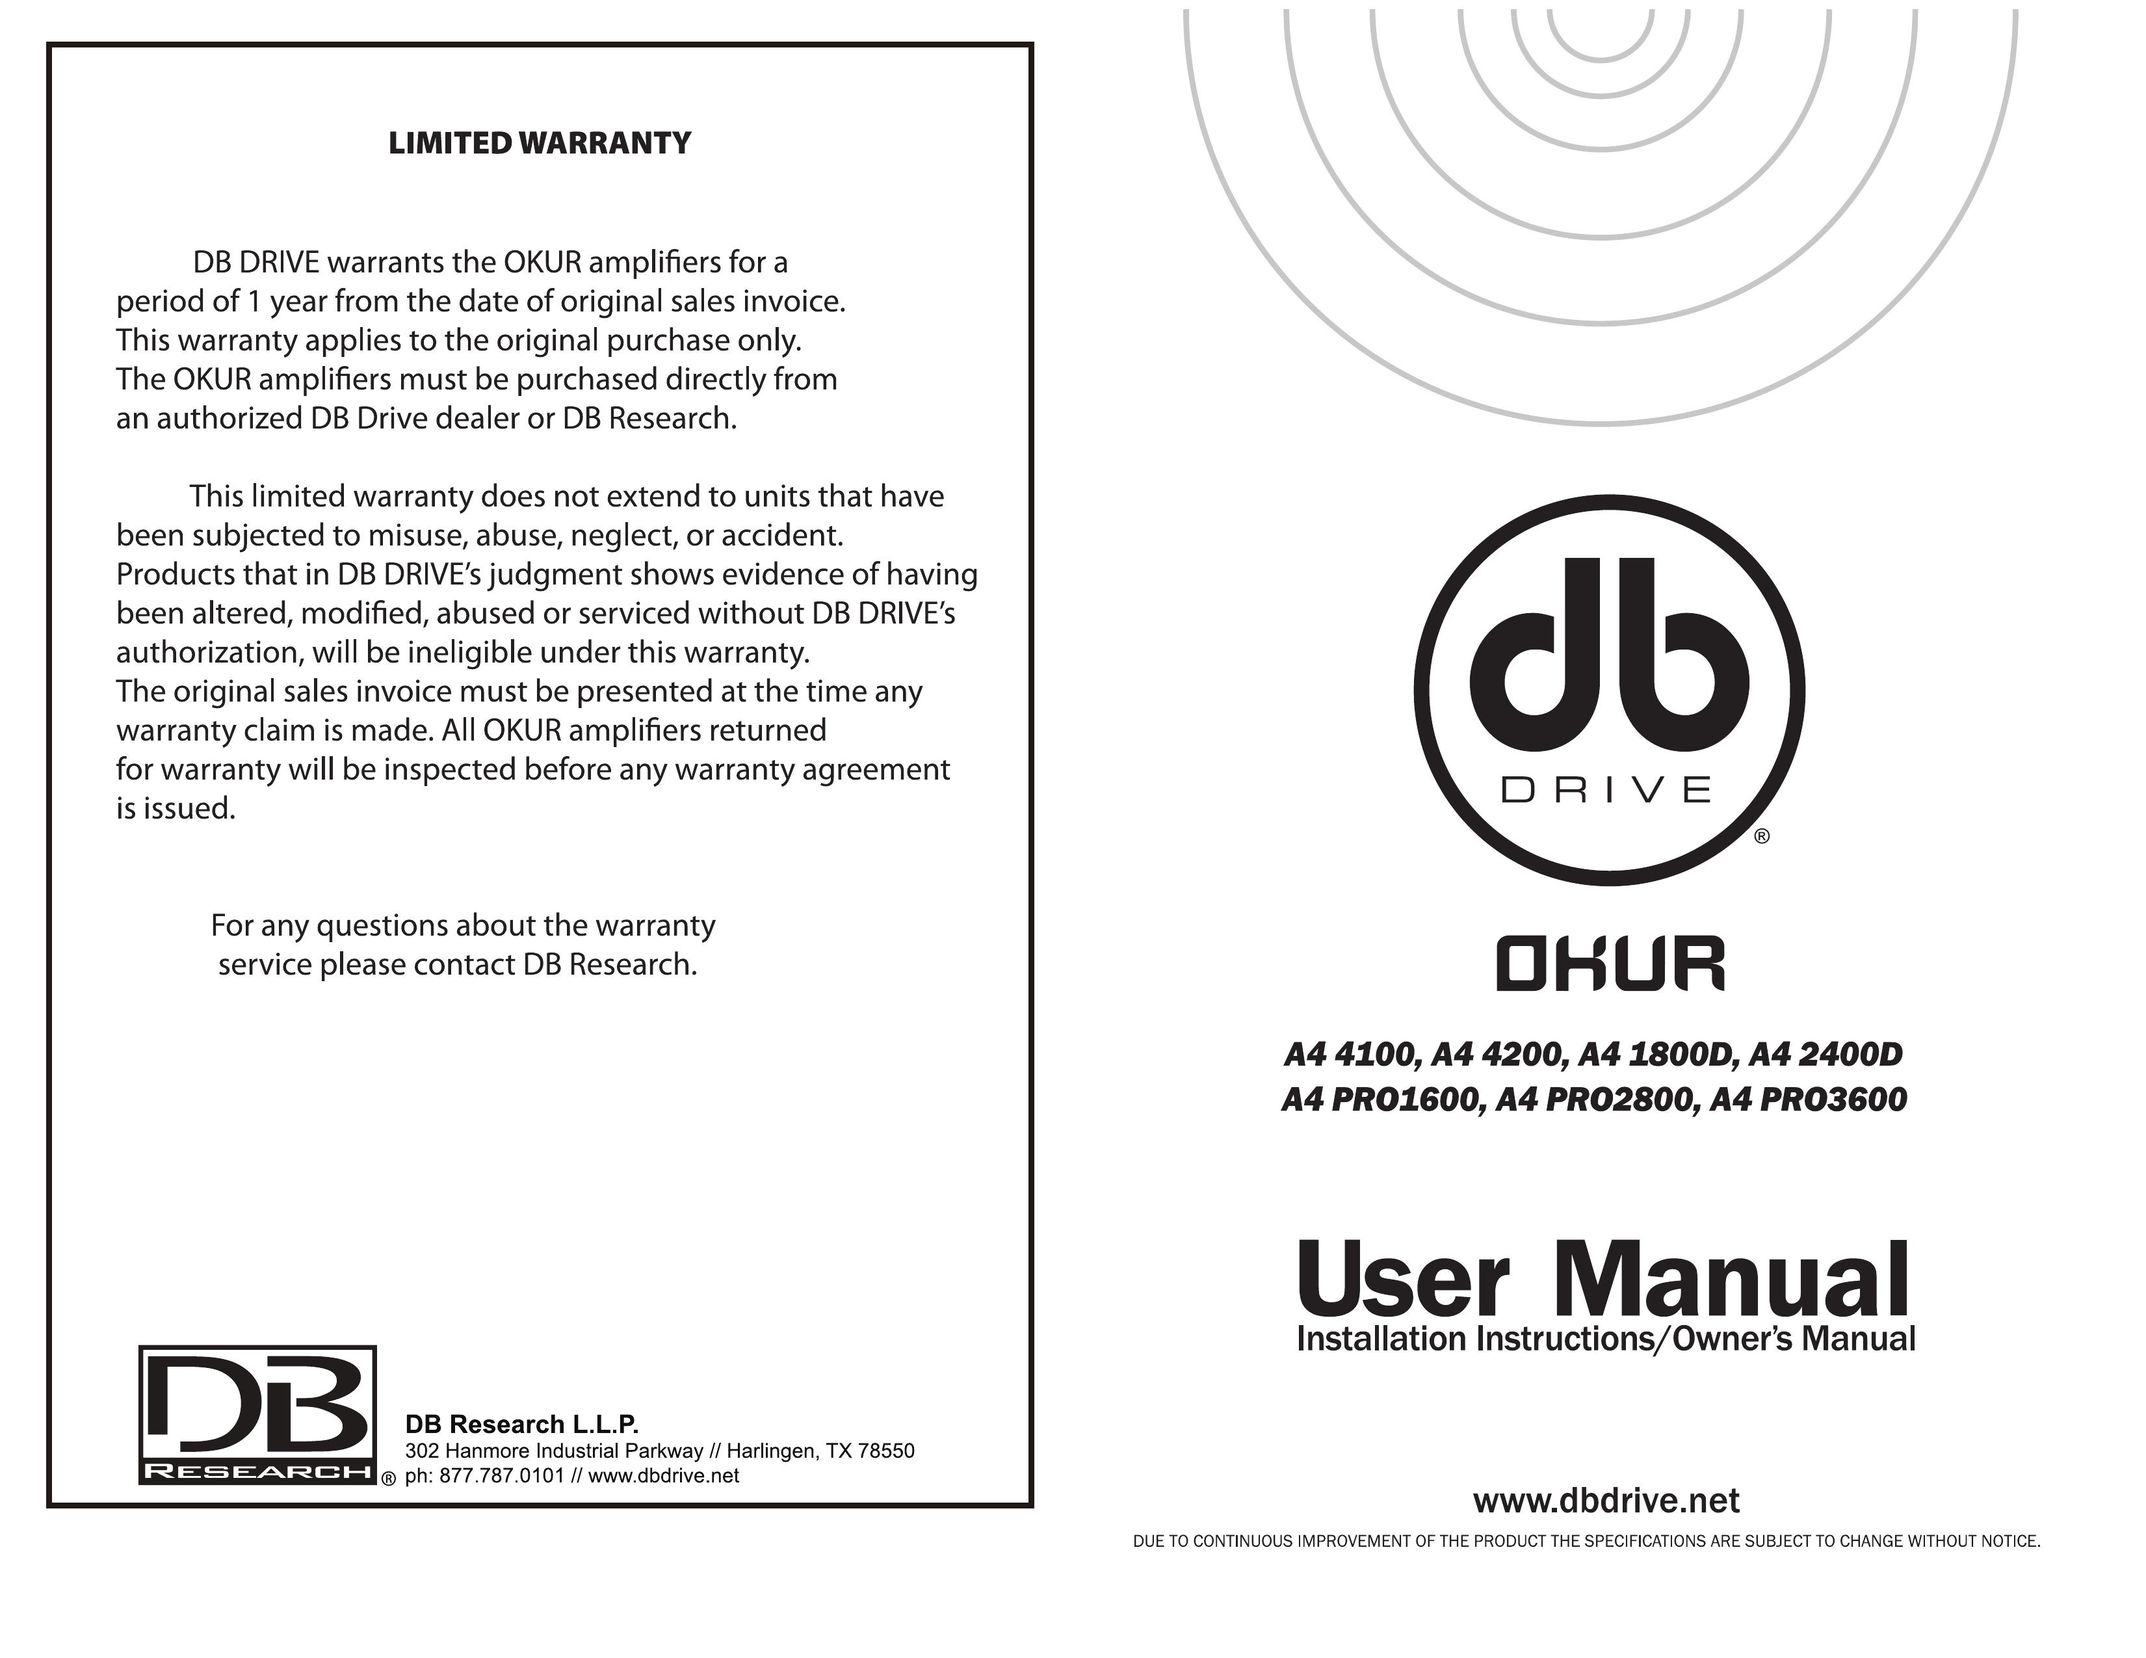 DB Industries A42400D Stereo Amplifier User Manual